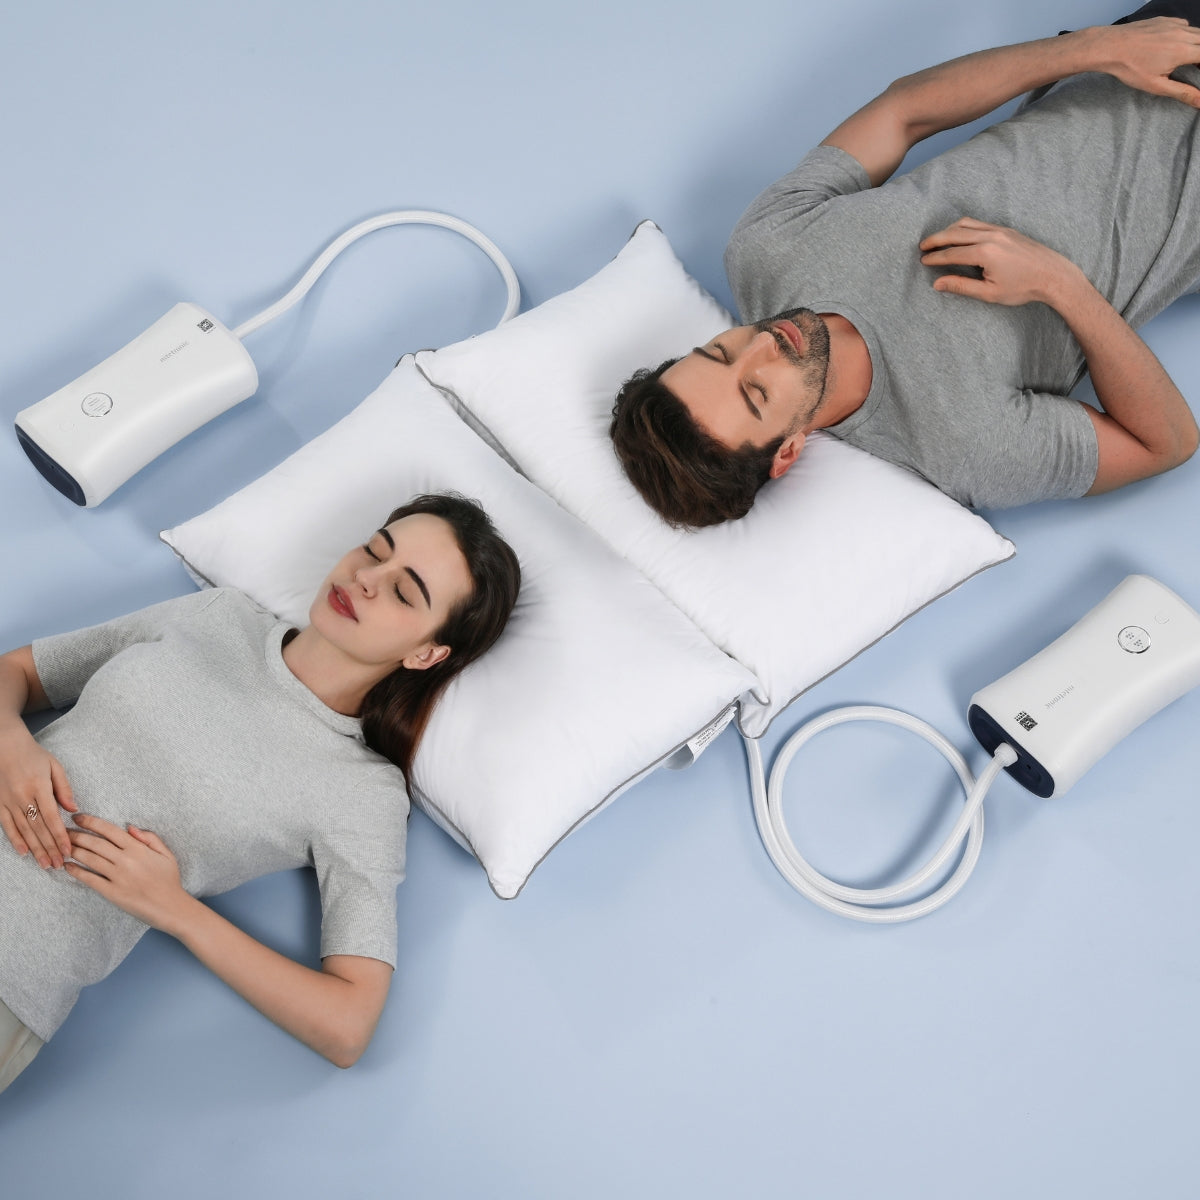 The Best Way to Stop It with Nitetronic's Anti-Snore Pillow